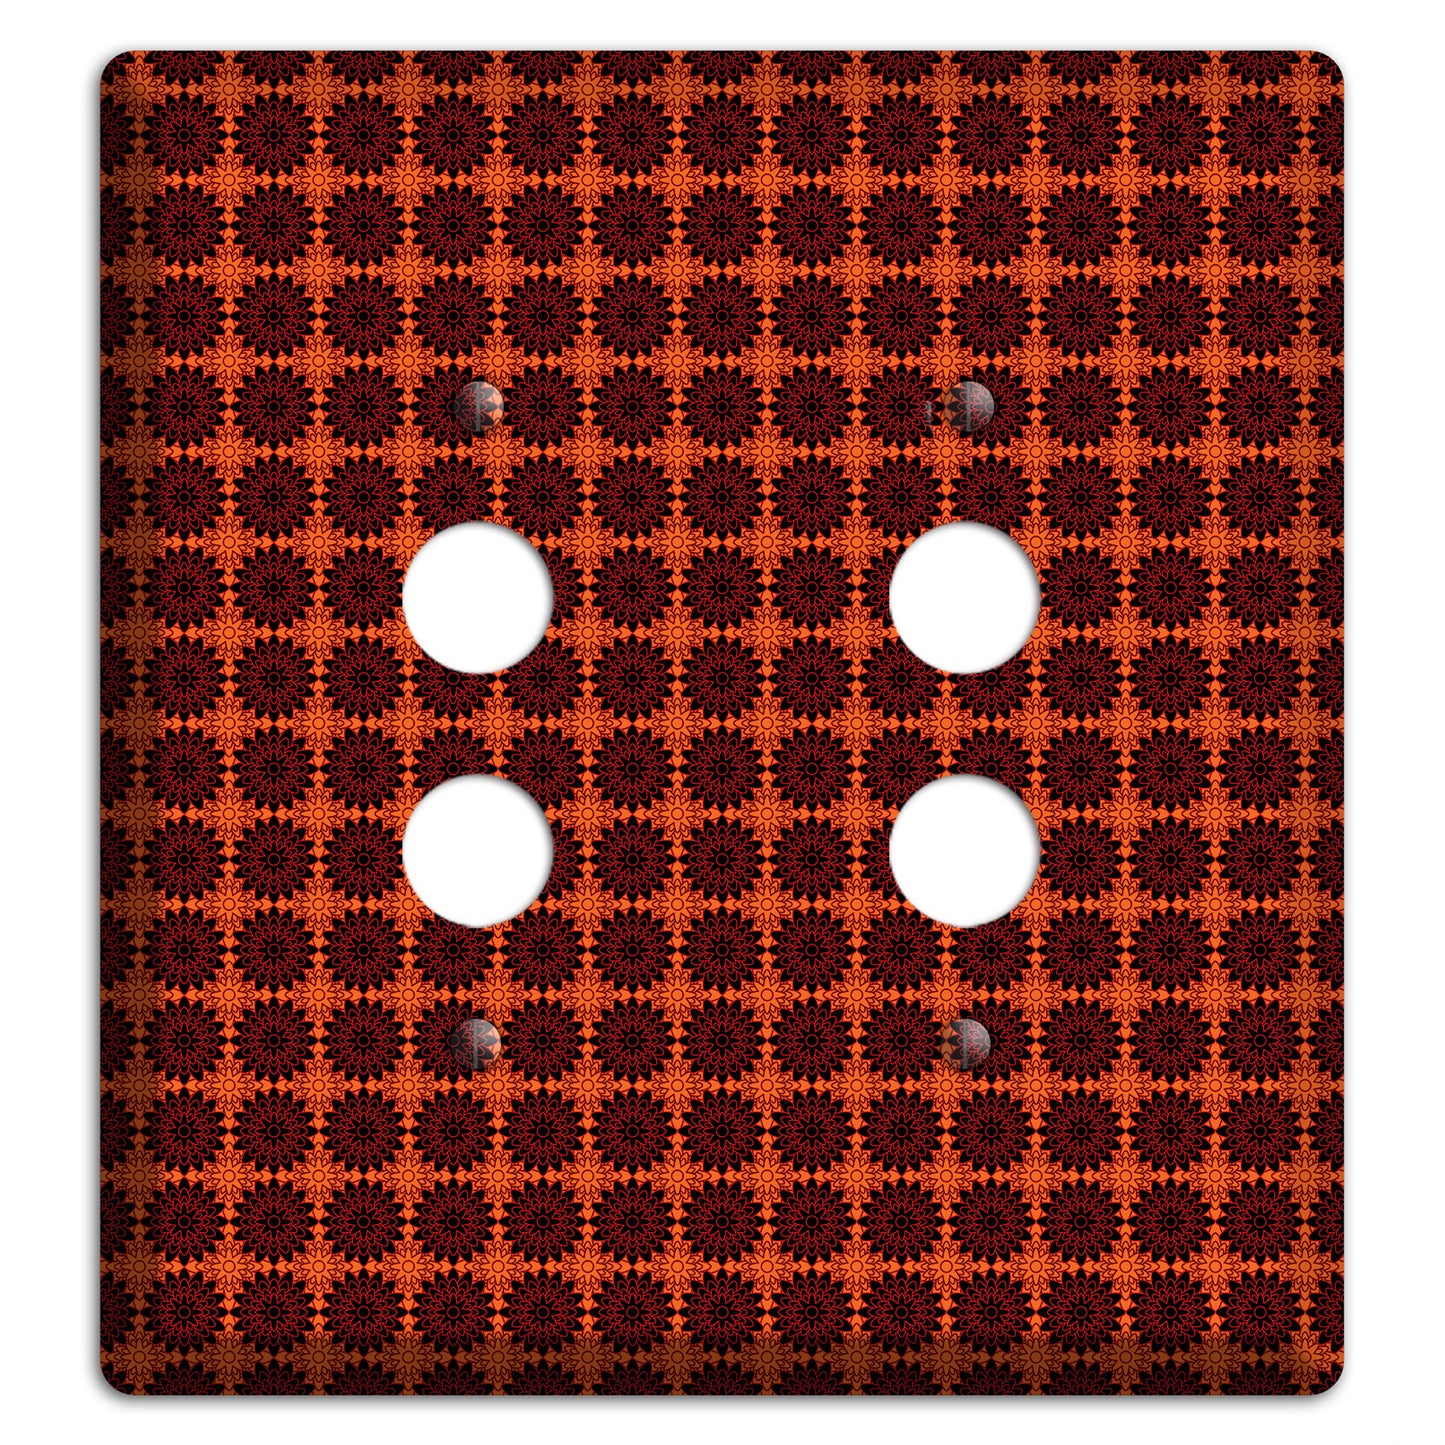 Red with Tiled Maroon Foulard 2 Pushbutton Wallplate